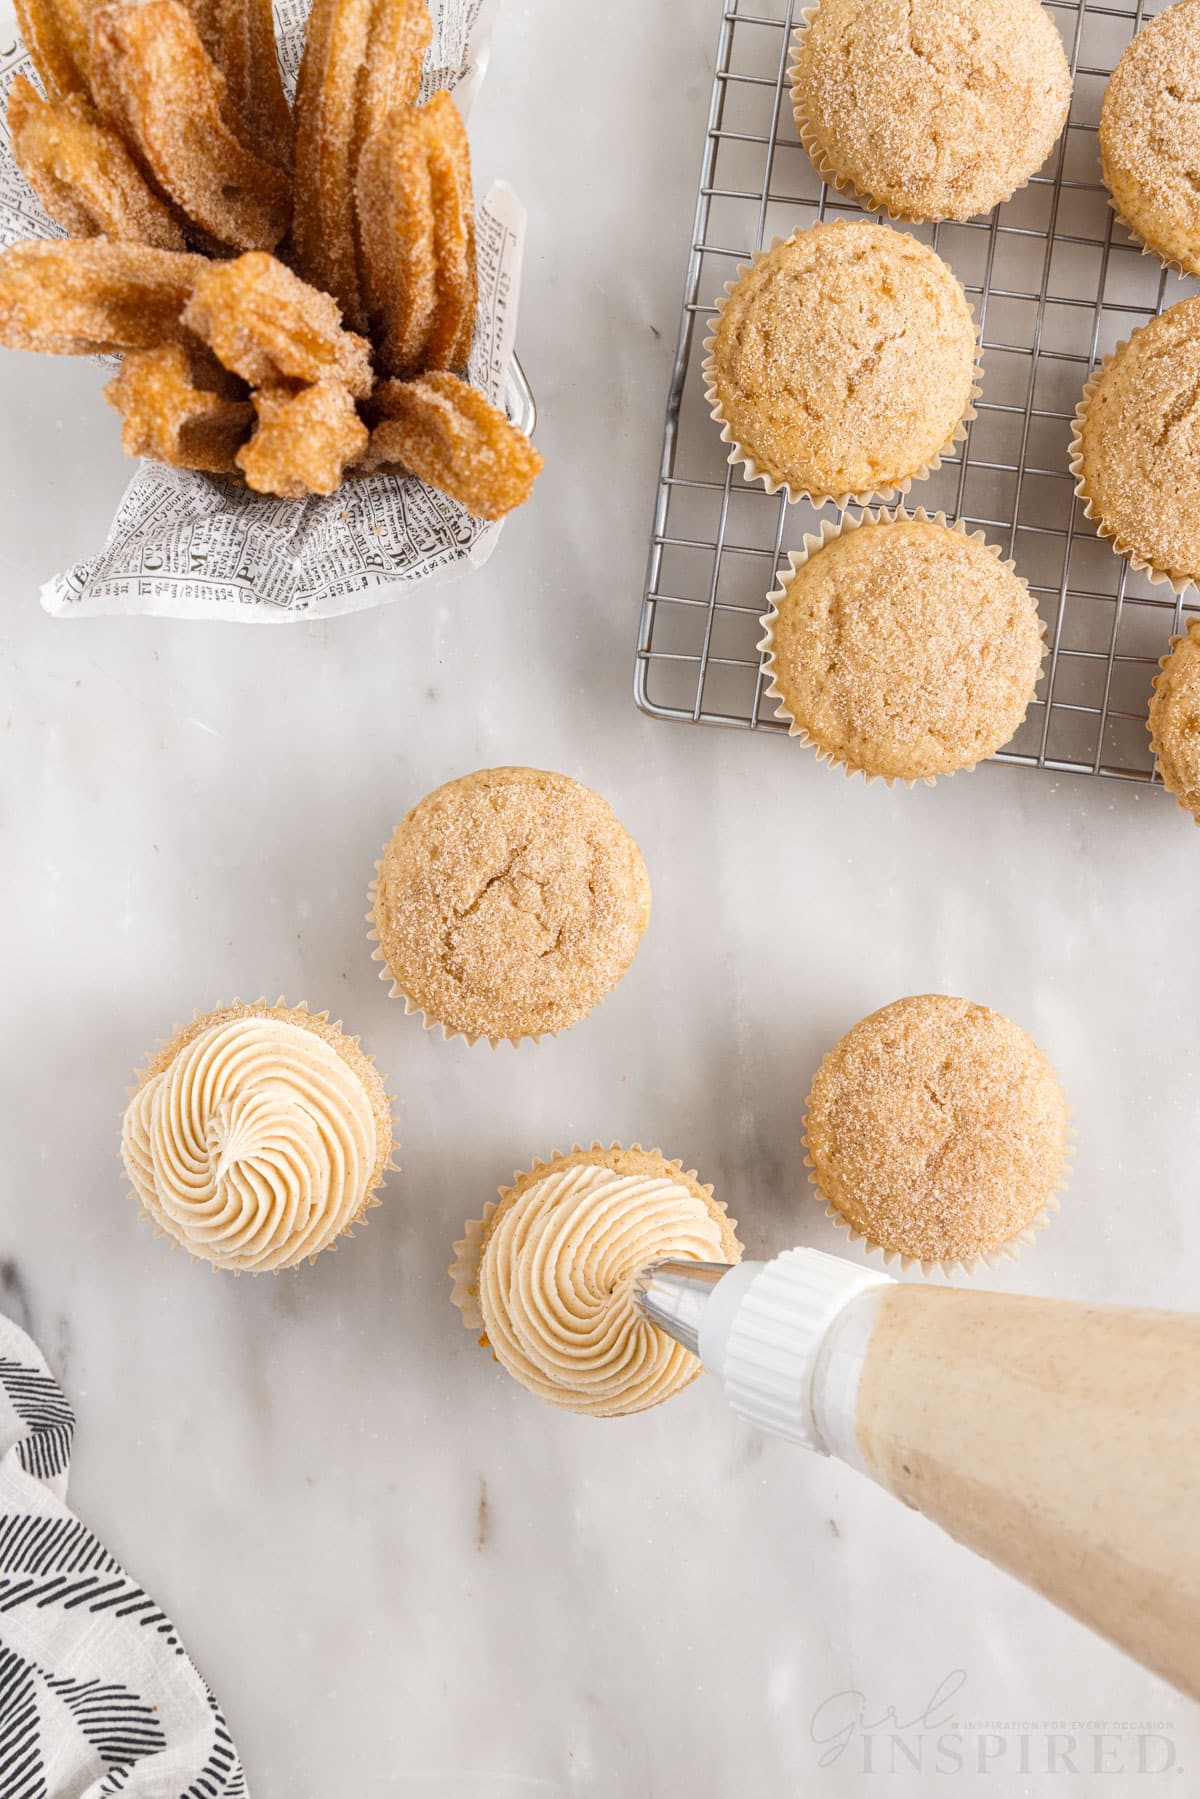 Four Churro Cupcakes being pipped with icing, in front of a cooling rack of Churro Cupcakes and a basket of Churros.